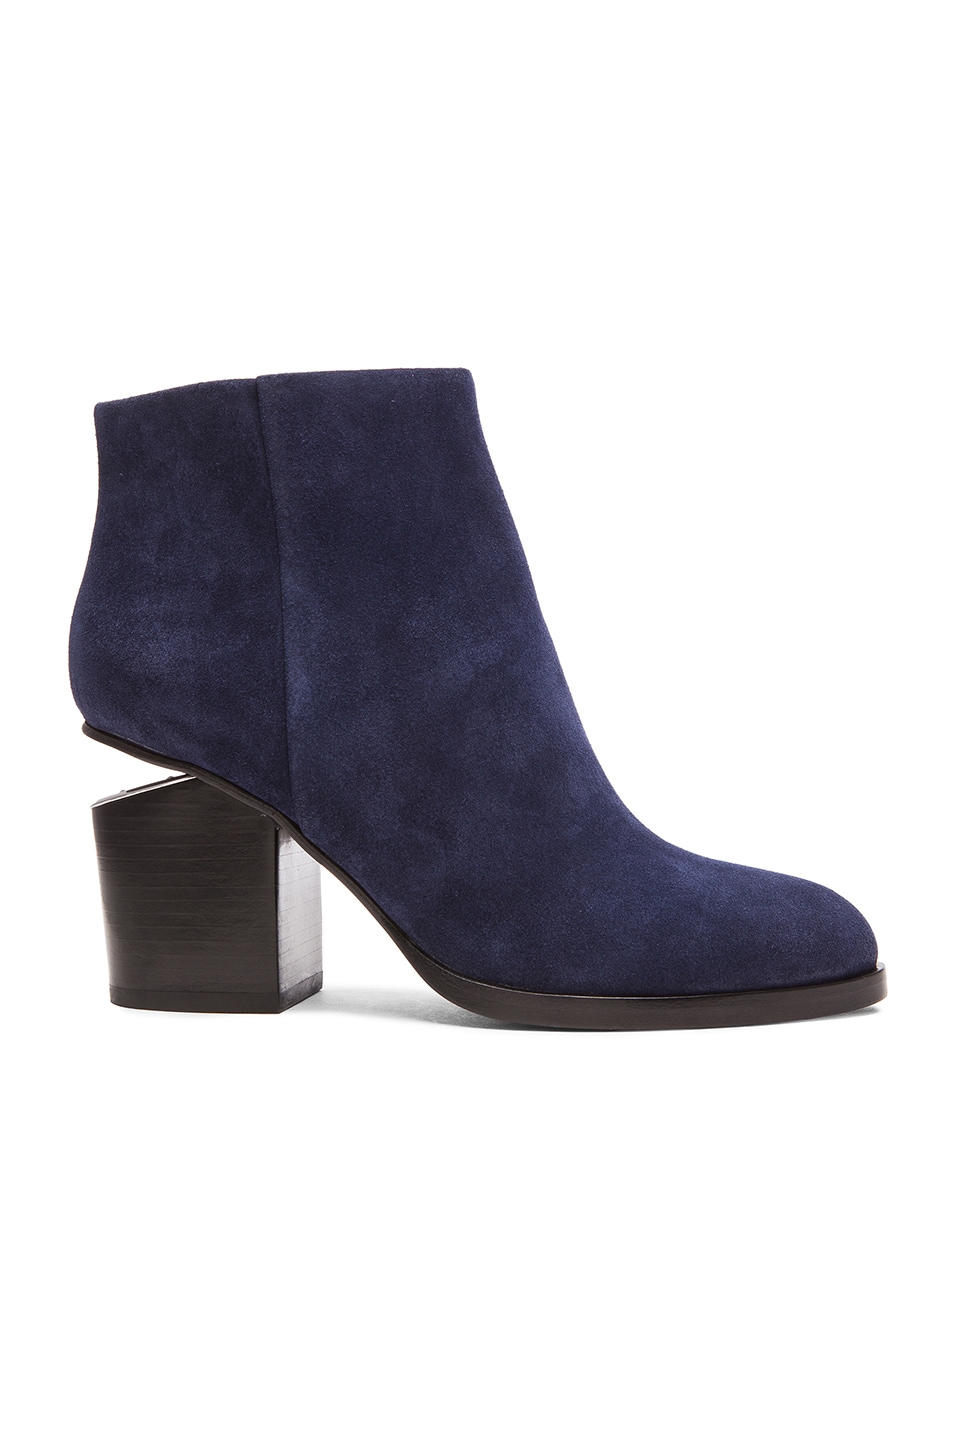 Image 1 of Alexander Wang Gabi Suede Ankle Booties with Silver Hardware in Lake